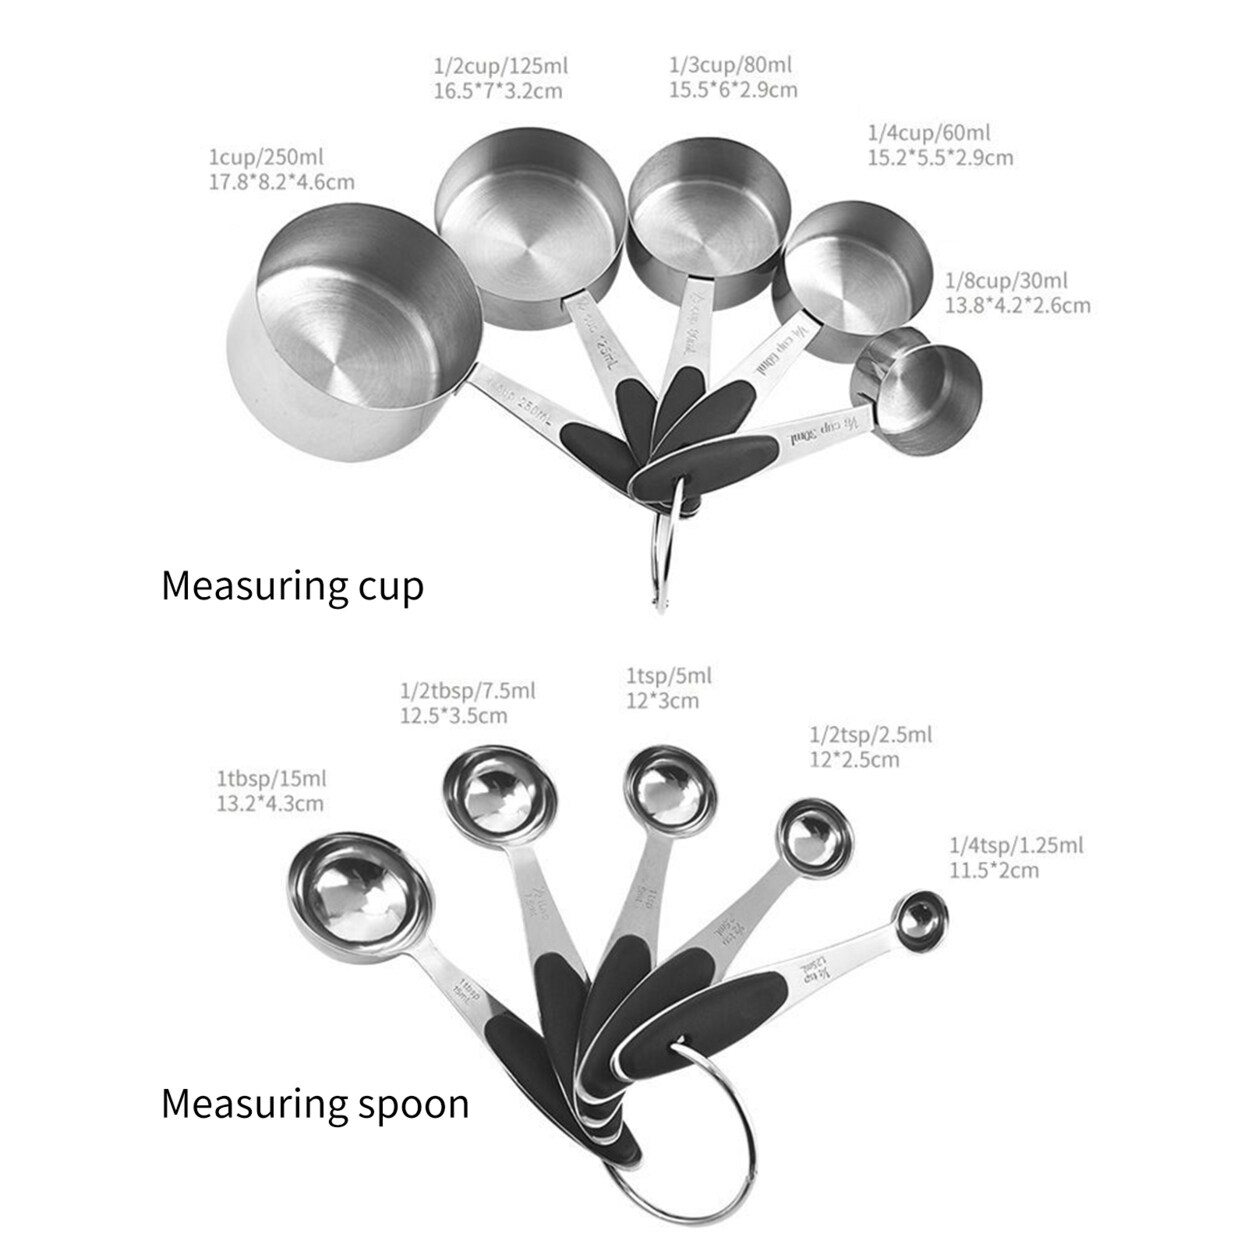 https://ak1.ostkcdn.com/images/products/is/images/direct/b6c4f9e97f52cfdfef85365fe6216886f13a61e4/1-Set-Round-Head-Measuring-Spoon-Long-Handle-Stainless-Steel-Comfortable-Grip-Measure-Scoop-Kitchen-Gadget.jpg